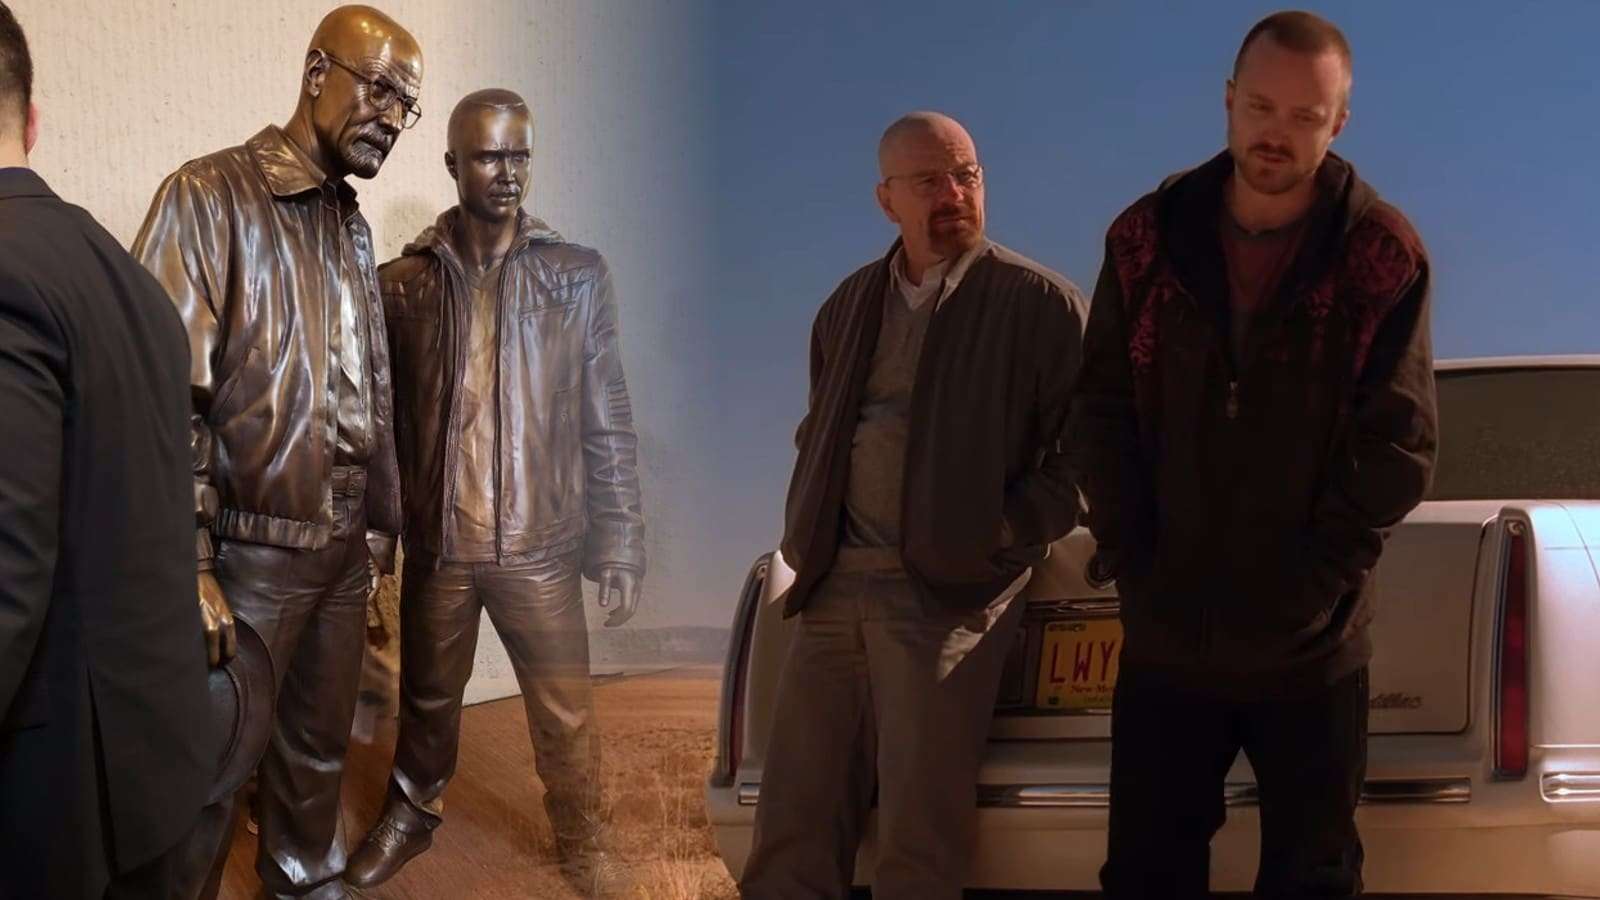 A statue of Breaking Bad characters Walter and Jesse has been unveiled